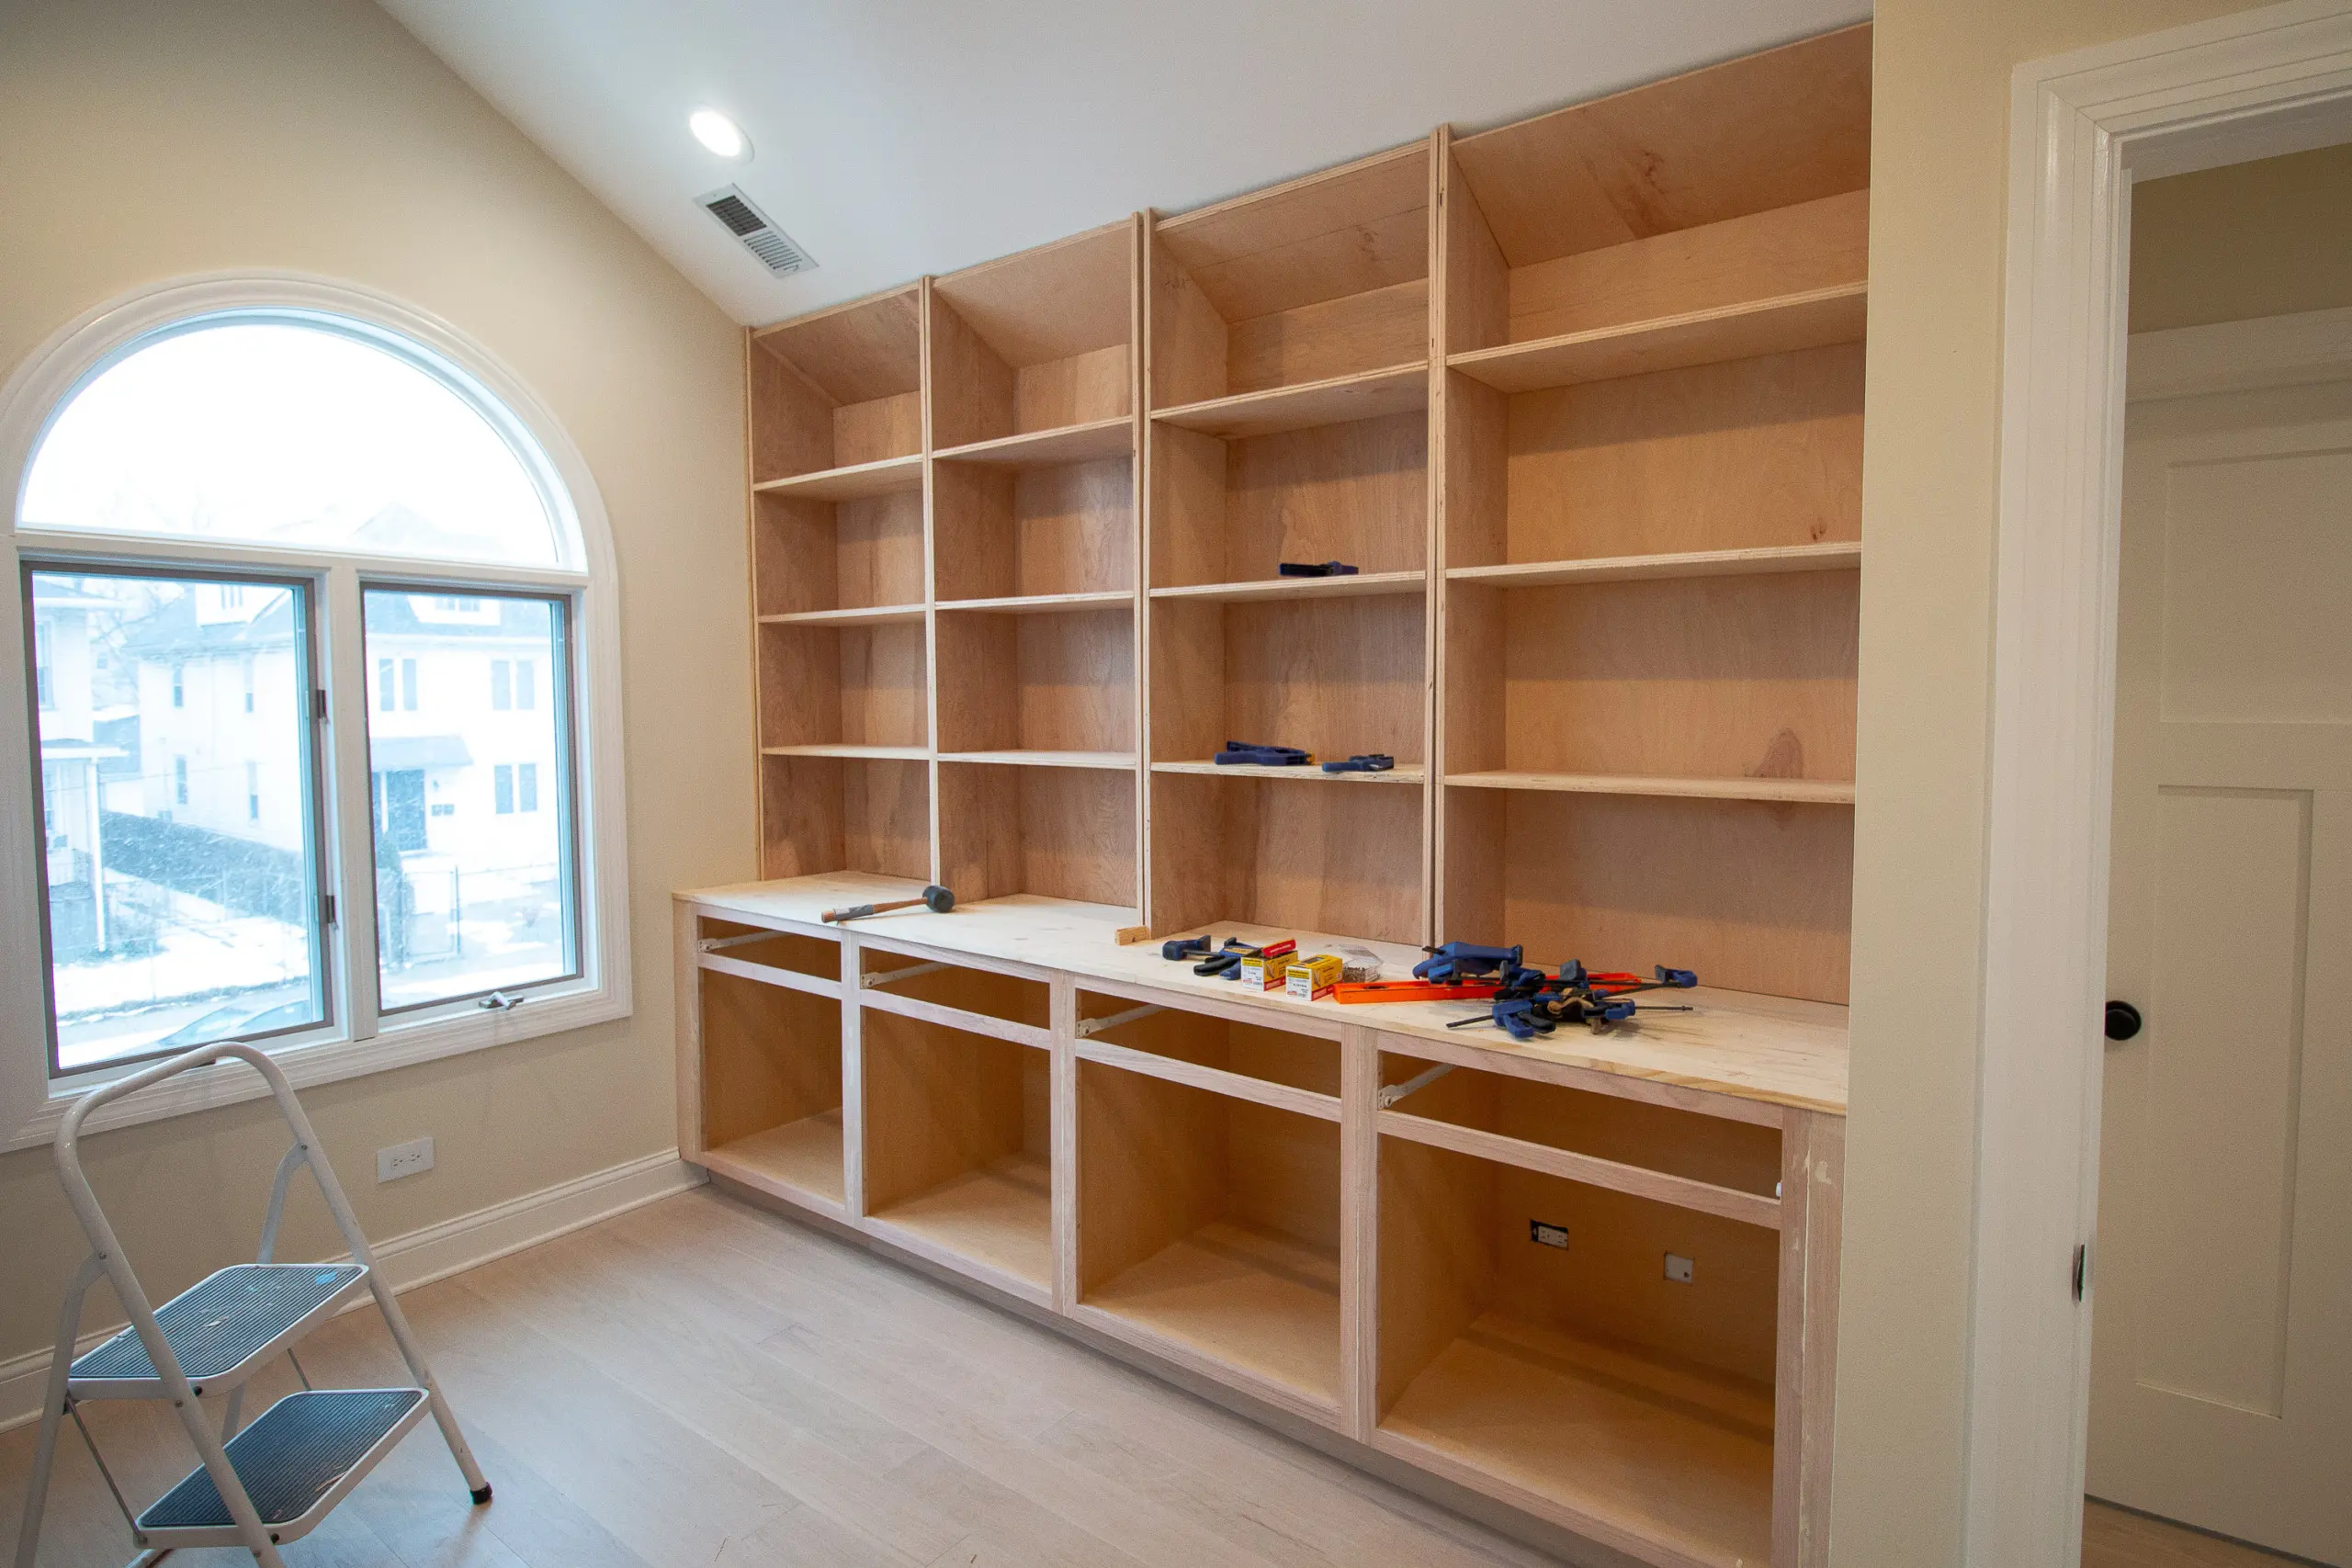 How to build DIY Built-ins